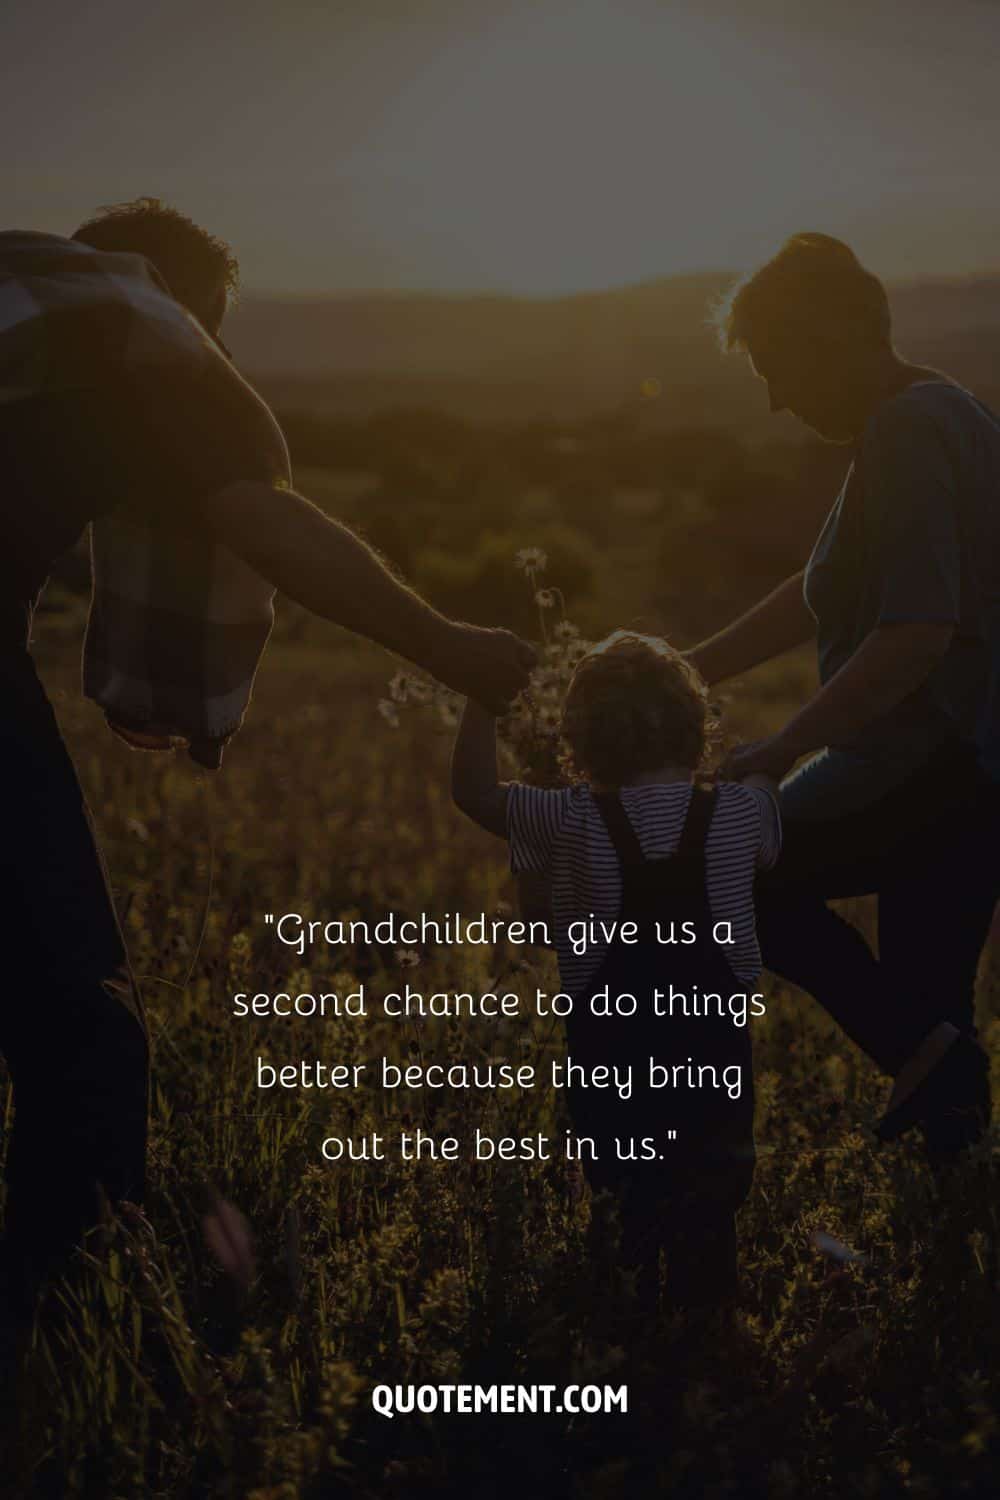 grandparents and their grandkid in a field representing an inspiring grandkids quote